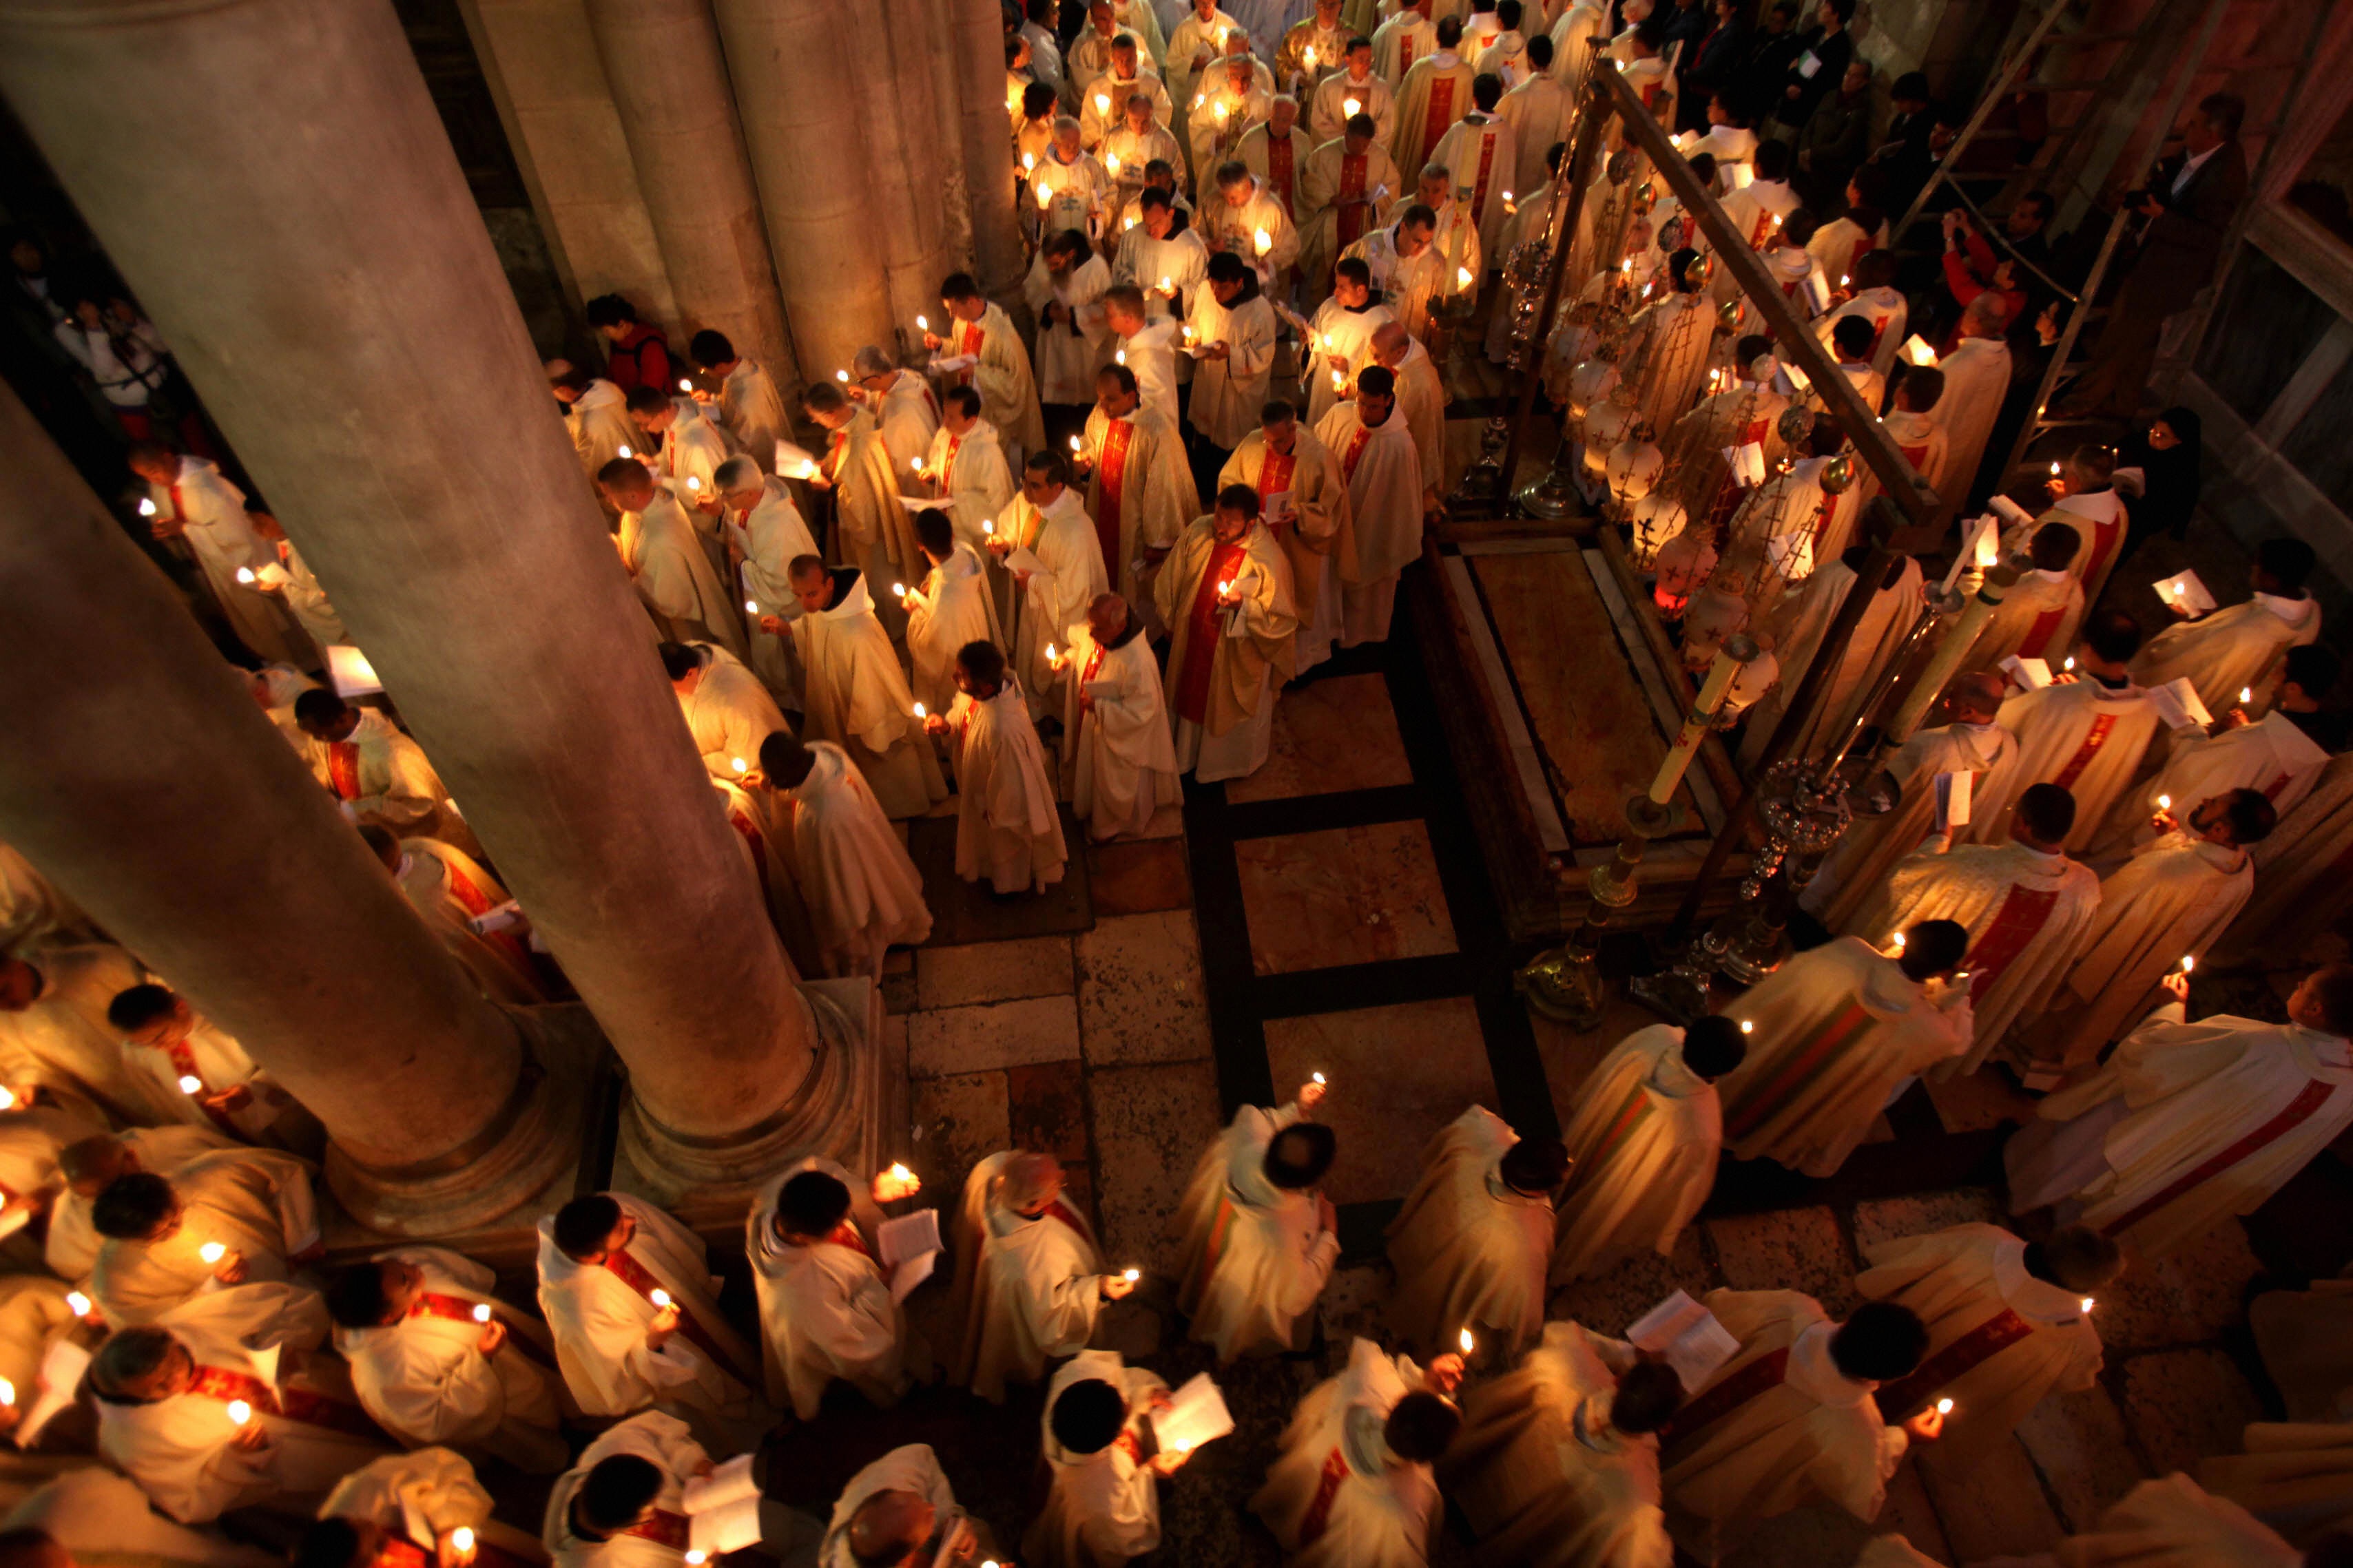 Roman Catholic clergy men hold candles as they circle the aedicule on Holy Thursday. Many Christians believe that  the Church of the Holy Sepulchre in Jerusalem is where Jesus was crucified and buried. Source:http://www.cnn.com